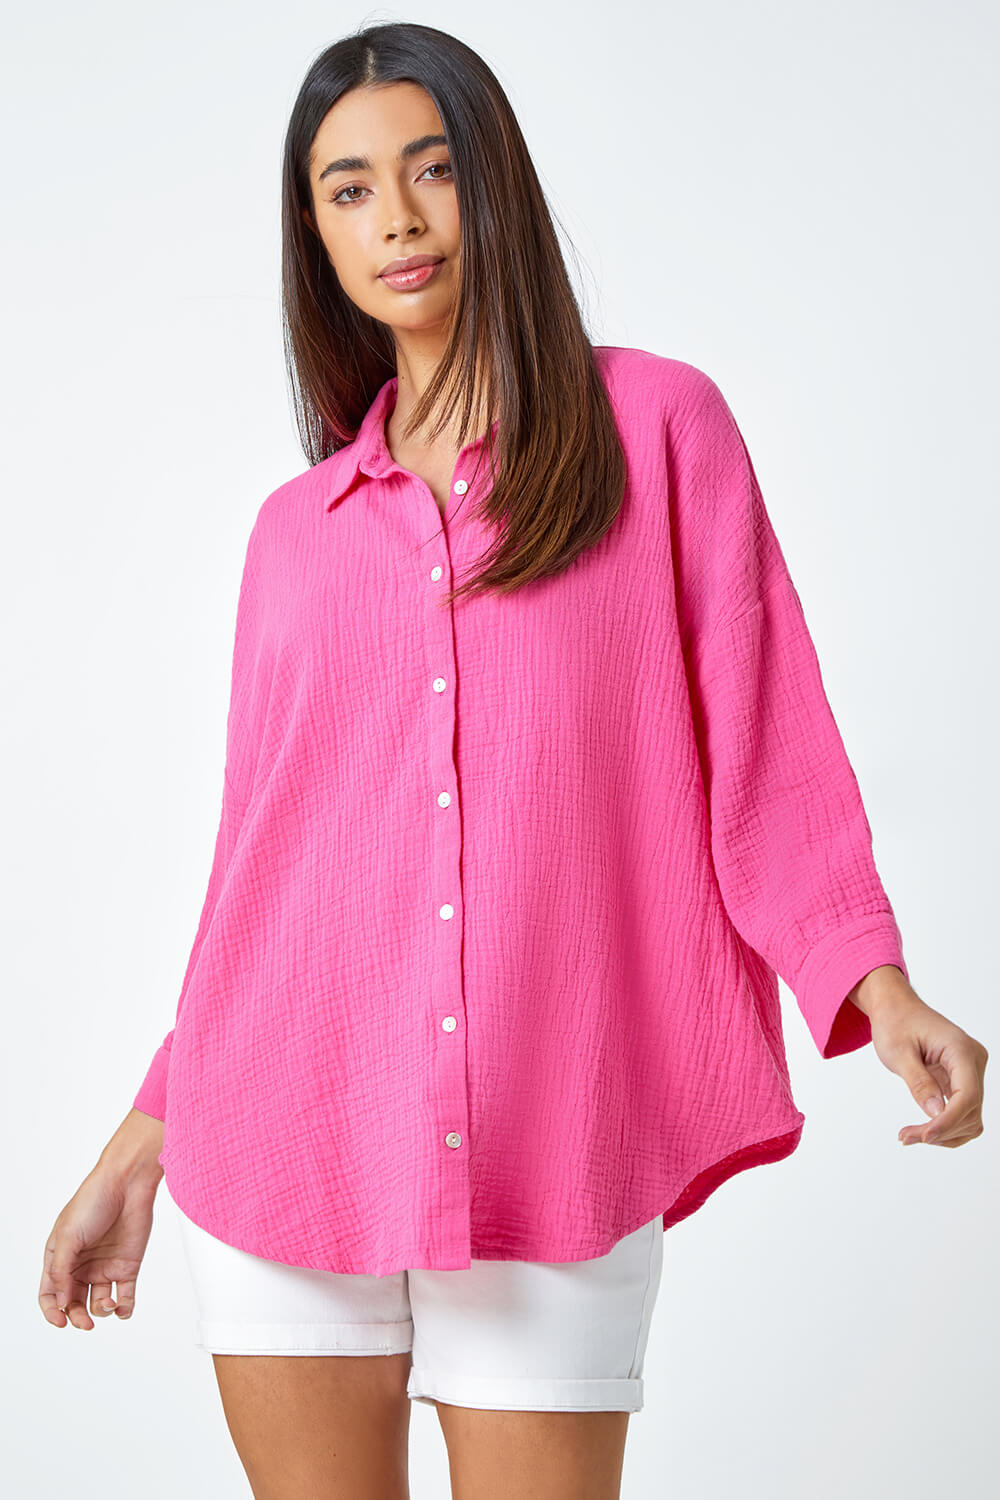 PINK Cotton Textured Button Shirt, Image 4 of 5